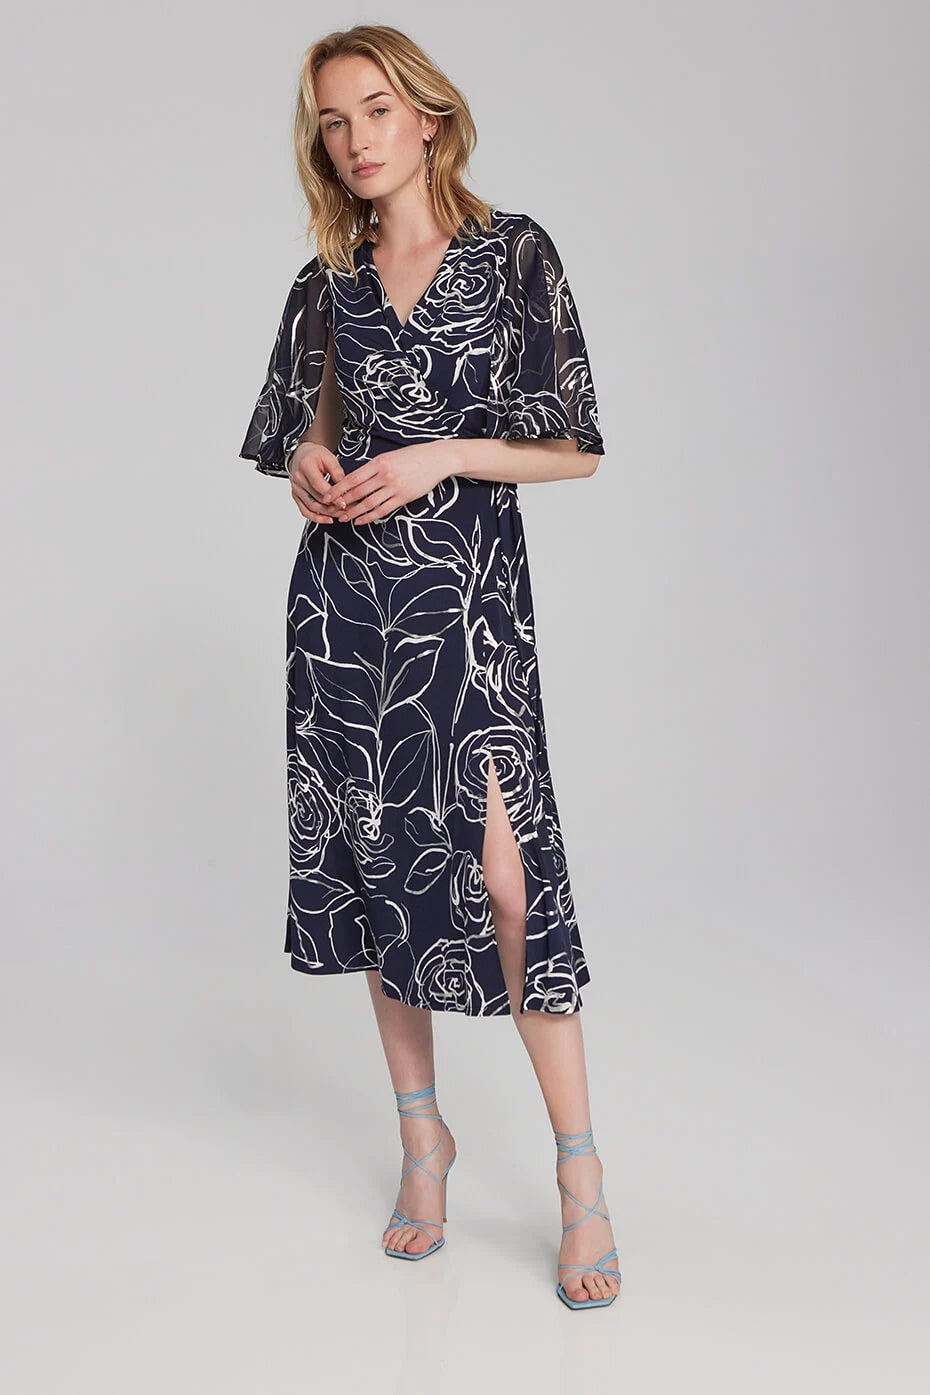 <p>Joseph Ribkoff Wrap style midi dress with chiffon sleeves and small slit at front in navy with a white floral pattern print</p>